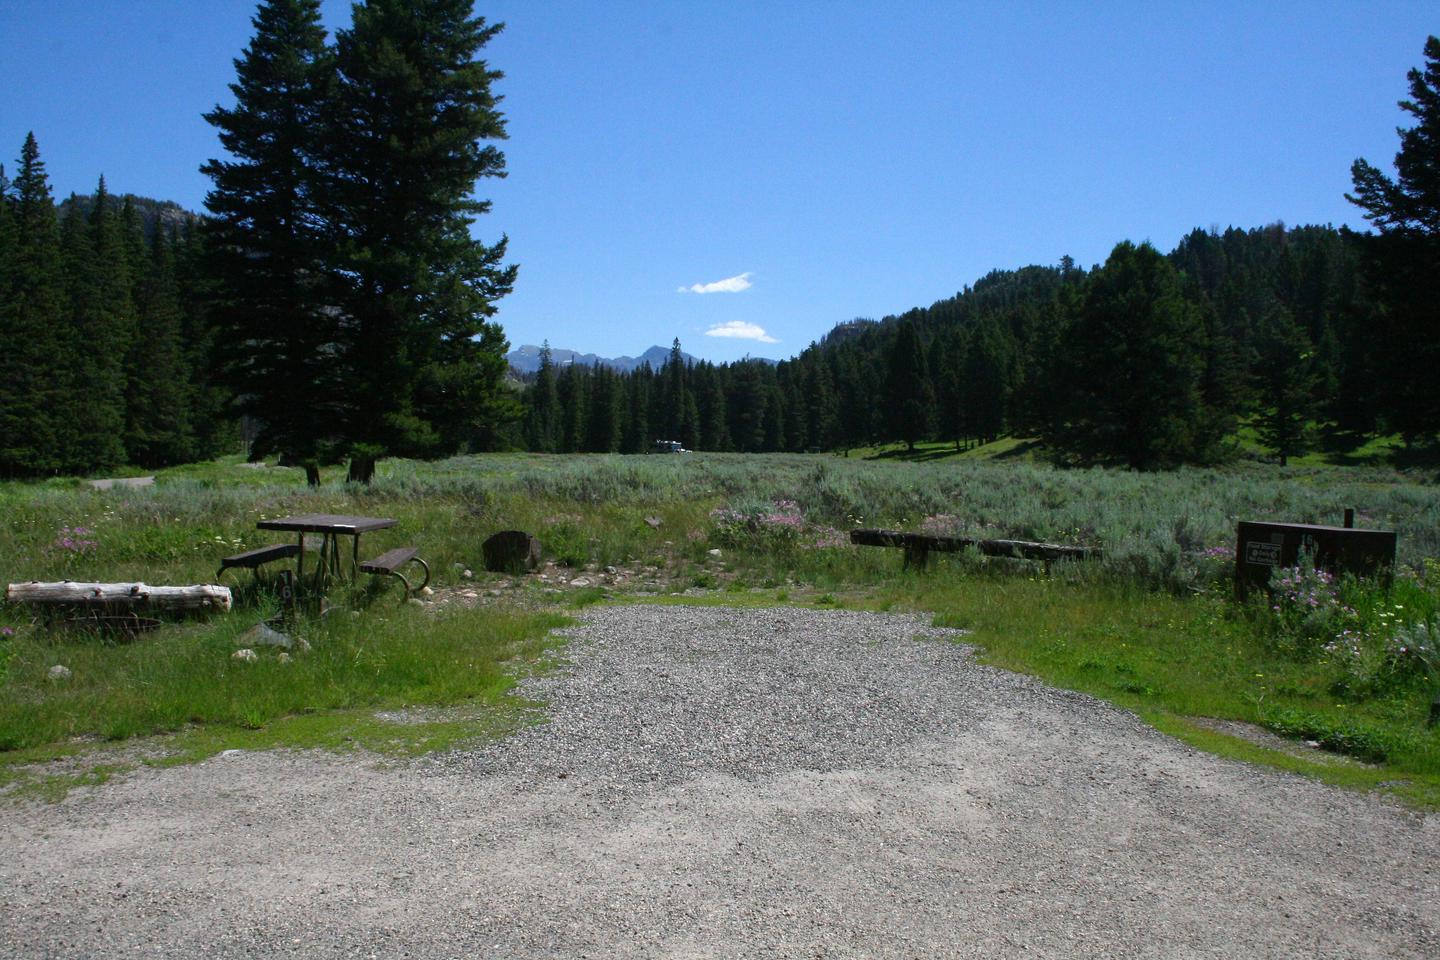 Slough Creek Campground site #16